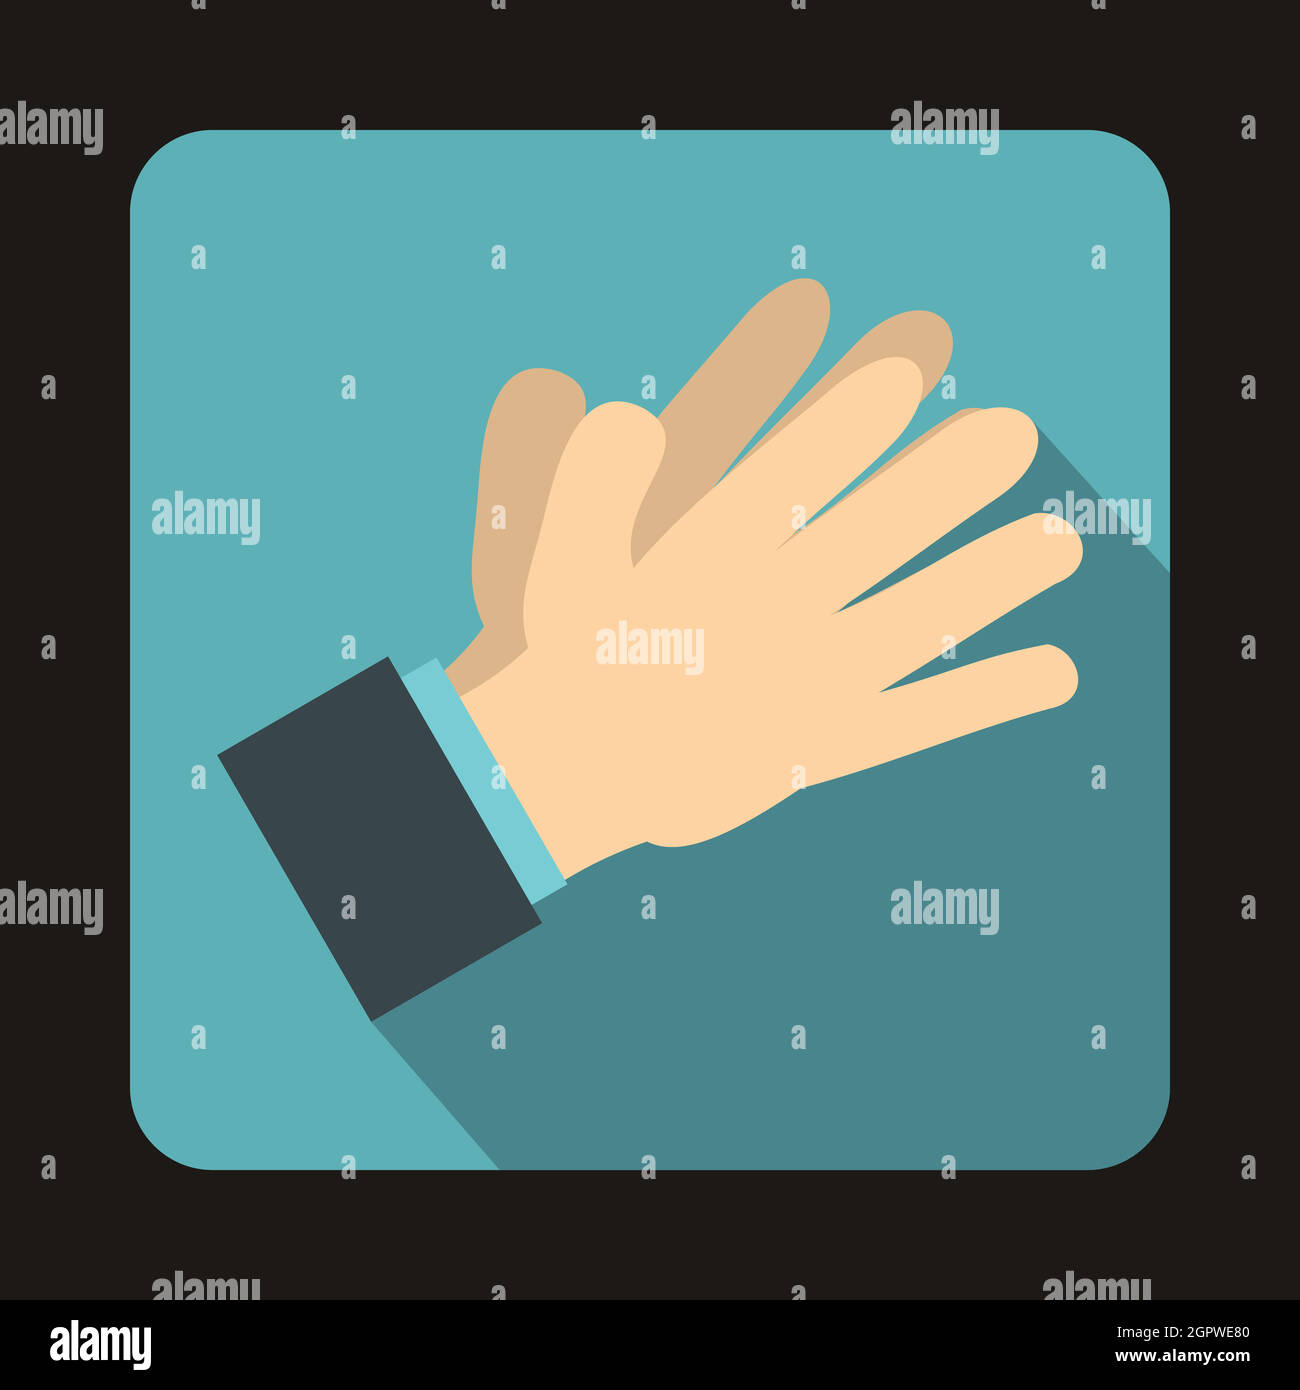 Clapping applauding hands icon, flat style Stock Vector